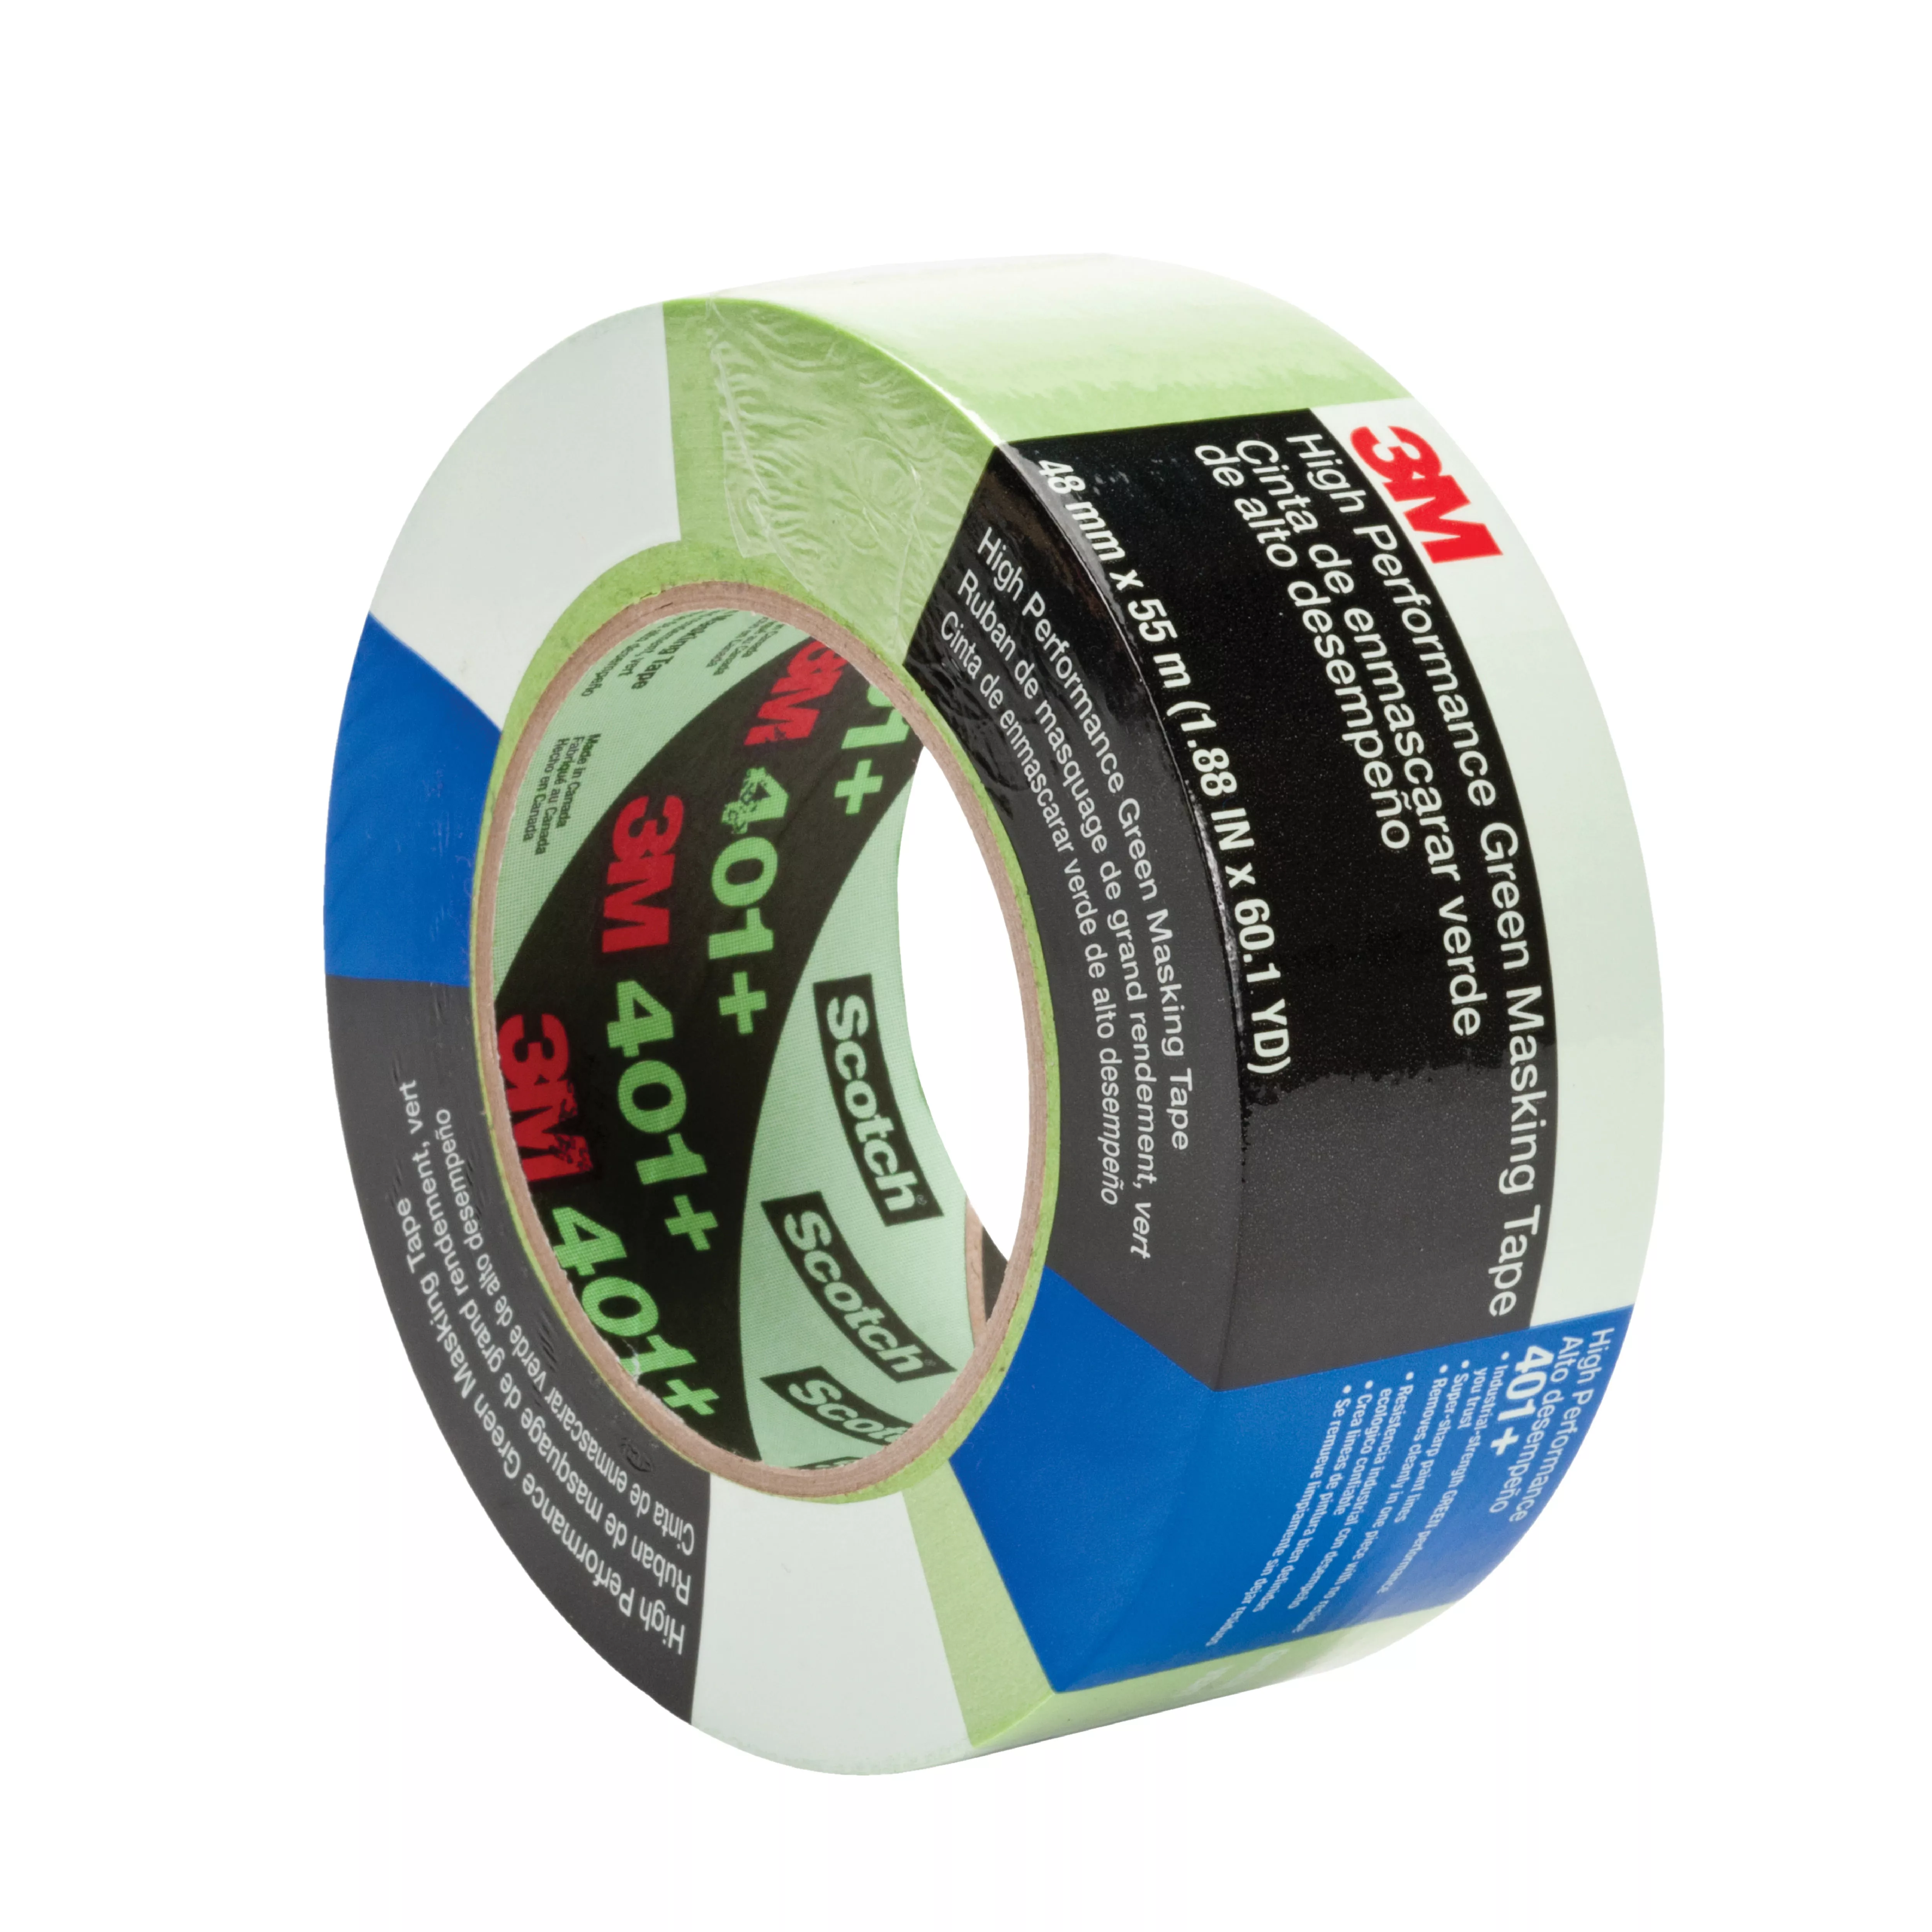 3M™ High Performance Green Masking Tape 401+, 48 mm x 55 m, 12
Roll/Case, Individually Wrapped Conveniently Packaged